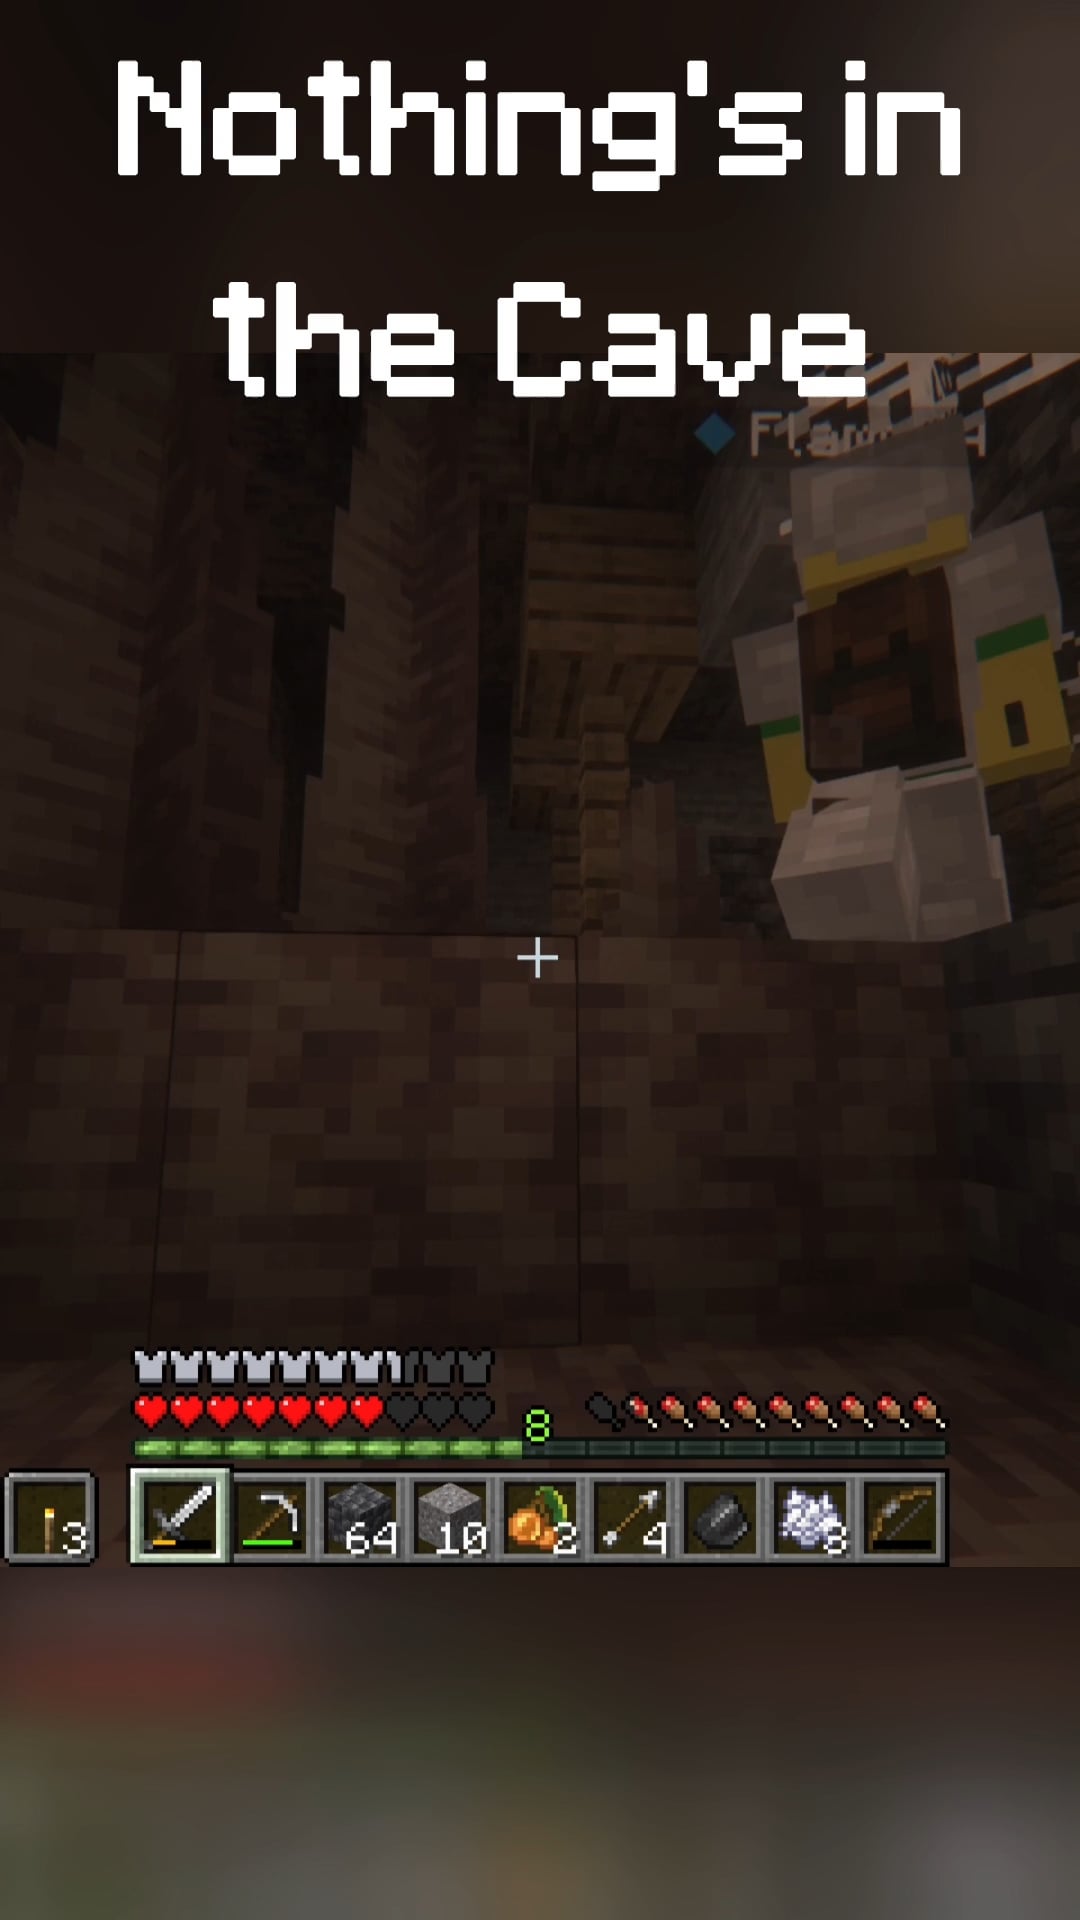 Minecraft Memes - "The Caves: NOT Peaceful"